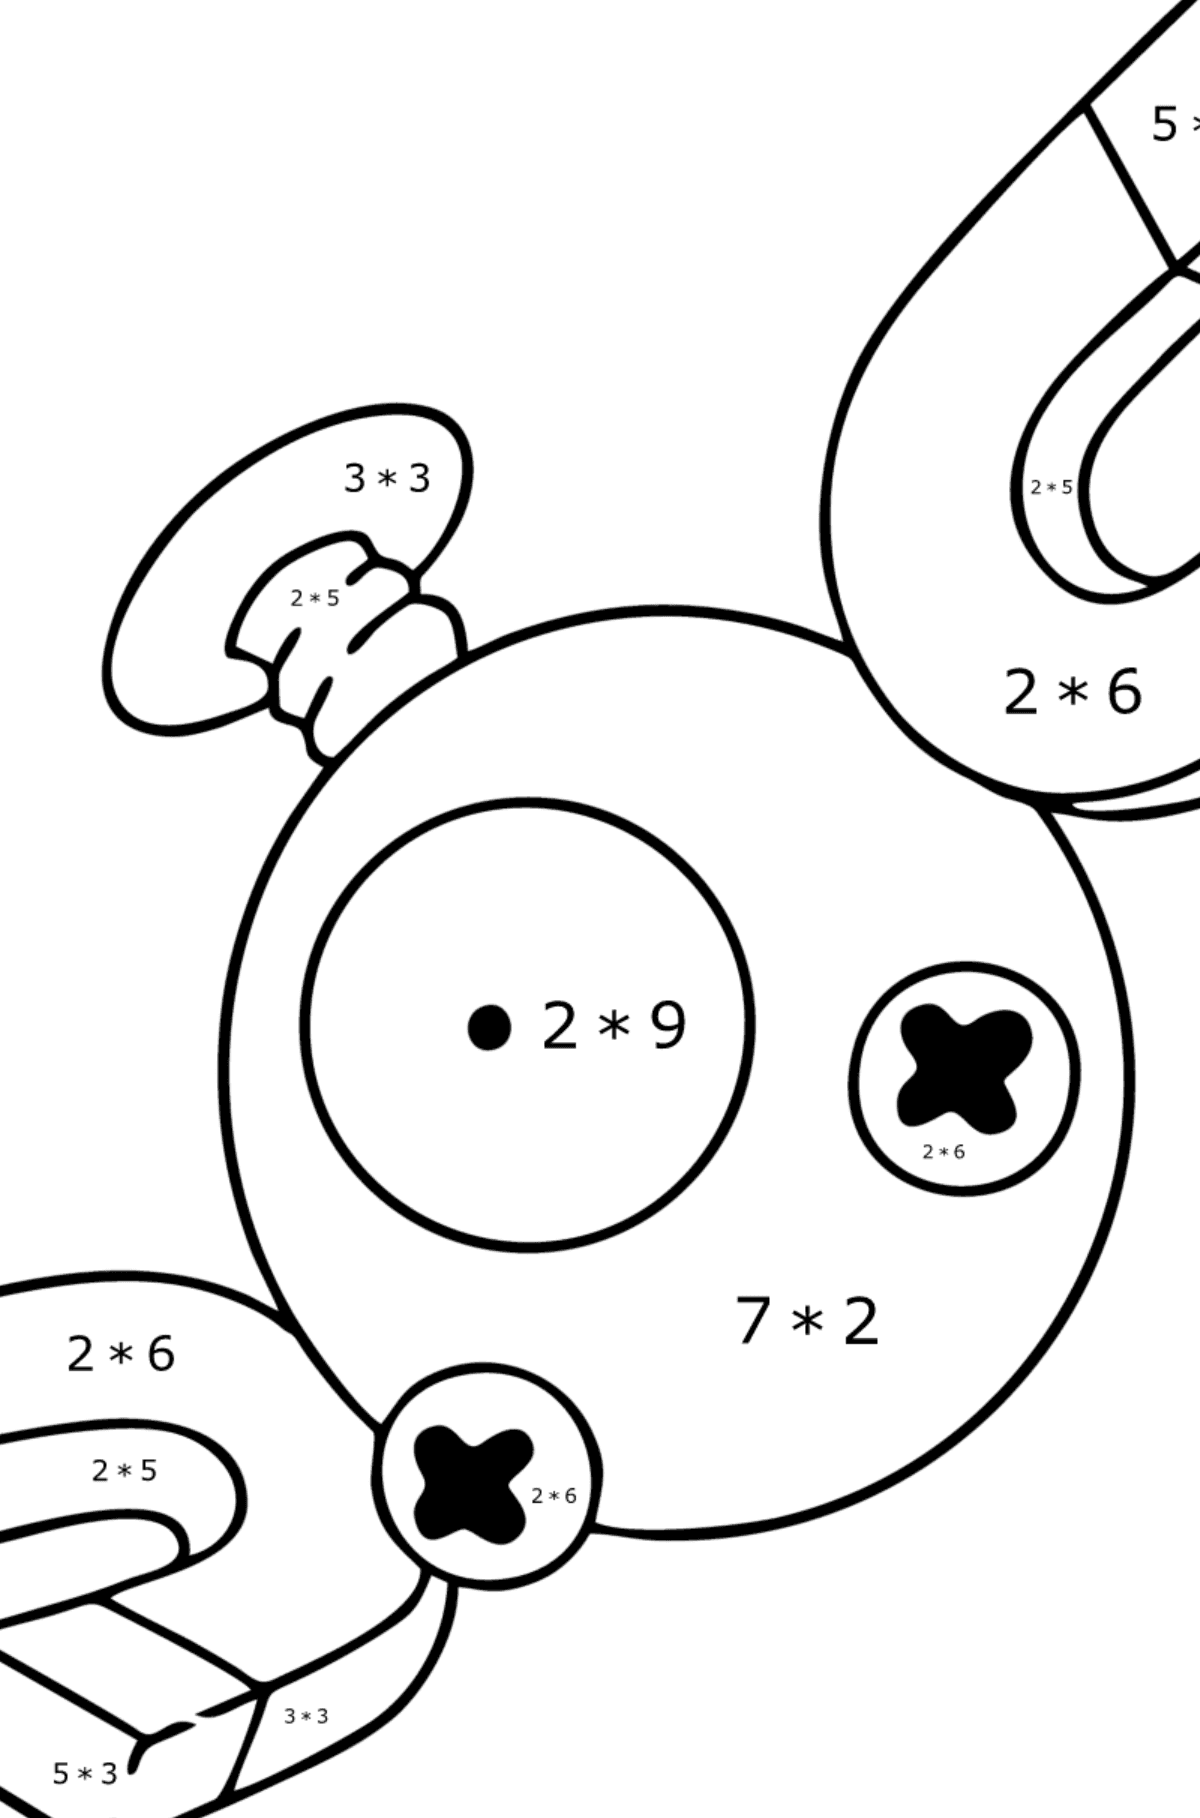 Coloring page Pokémon Go Magnemite - Math Coloring - Multiplication for Kids